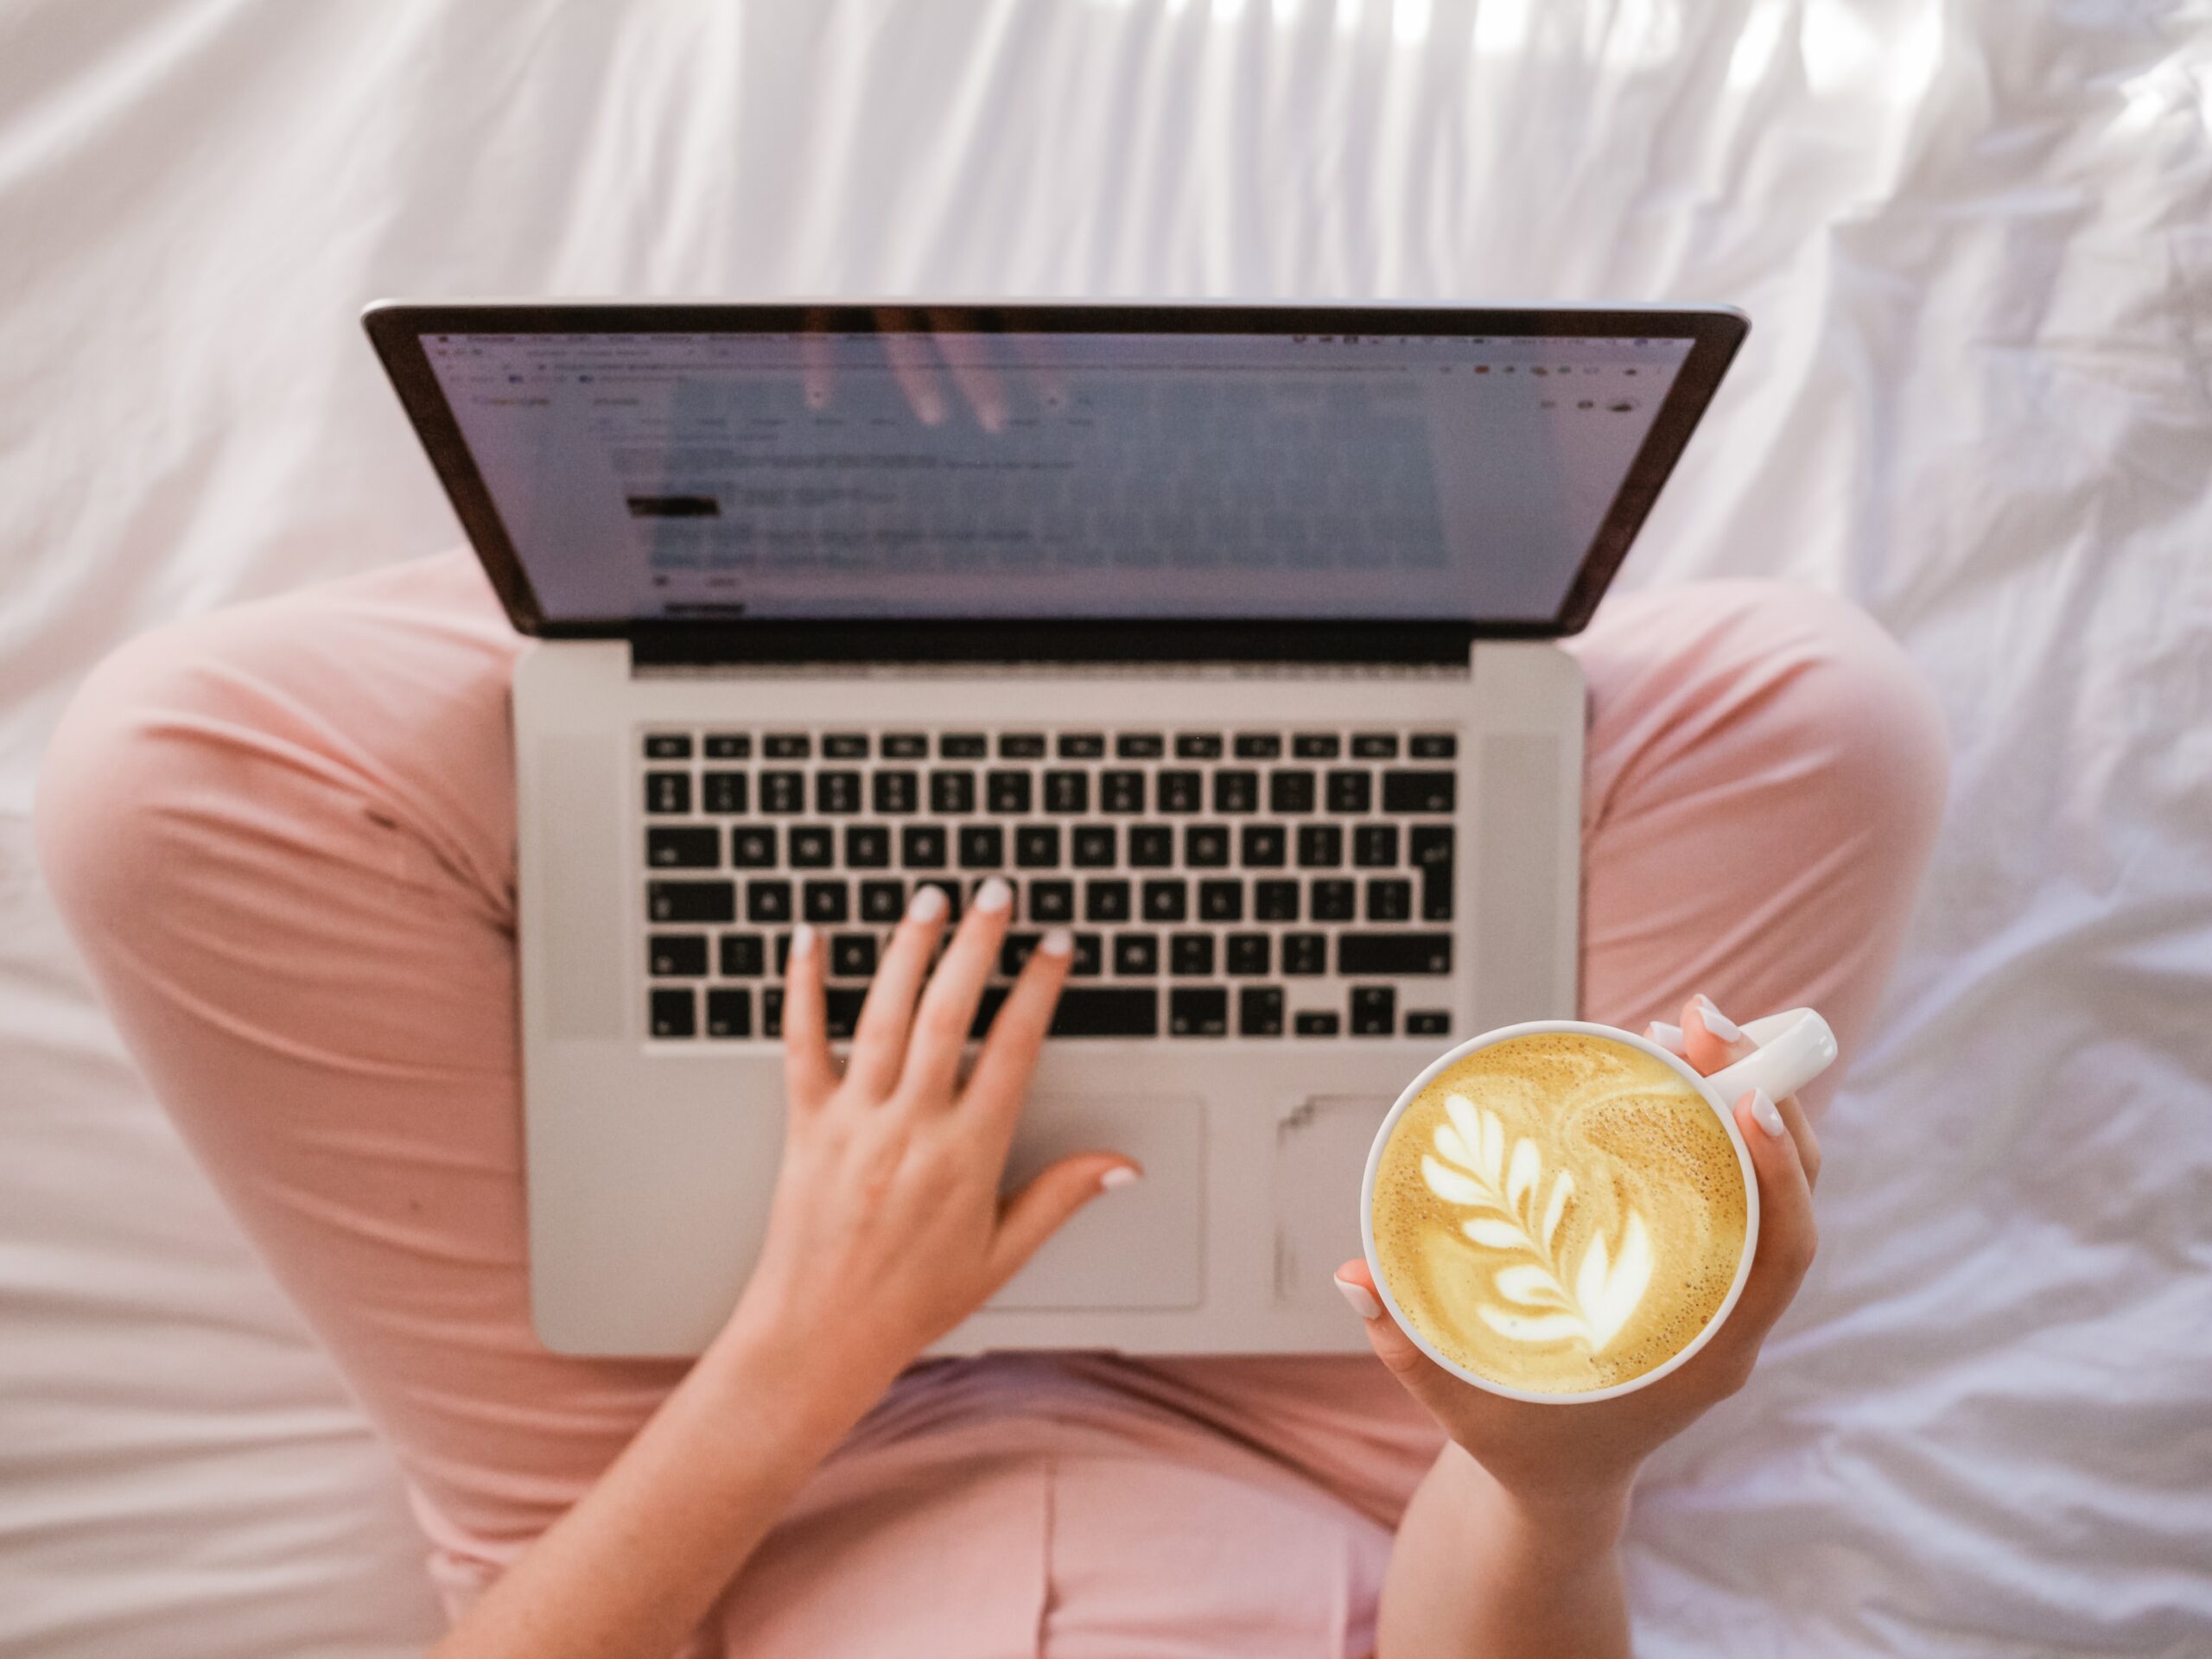 An overhead view of a laptop in the lap of a woman wearing pink lounge pants. She holds a teacup with latte art in one hand.